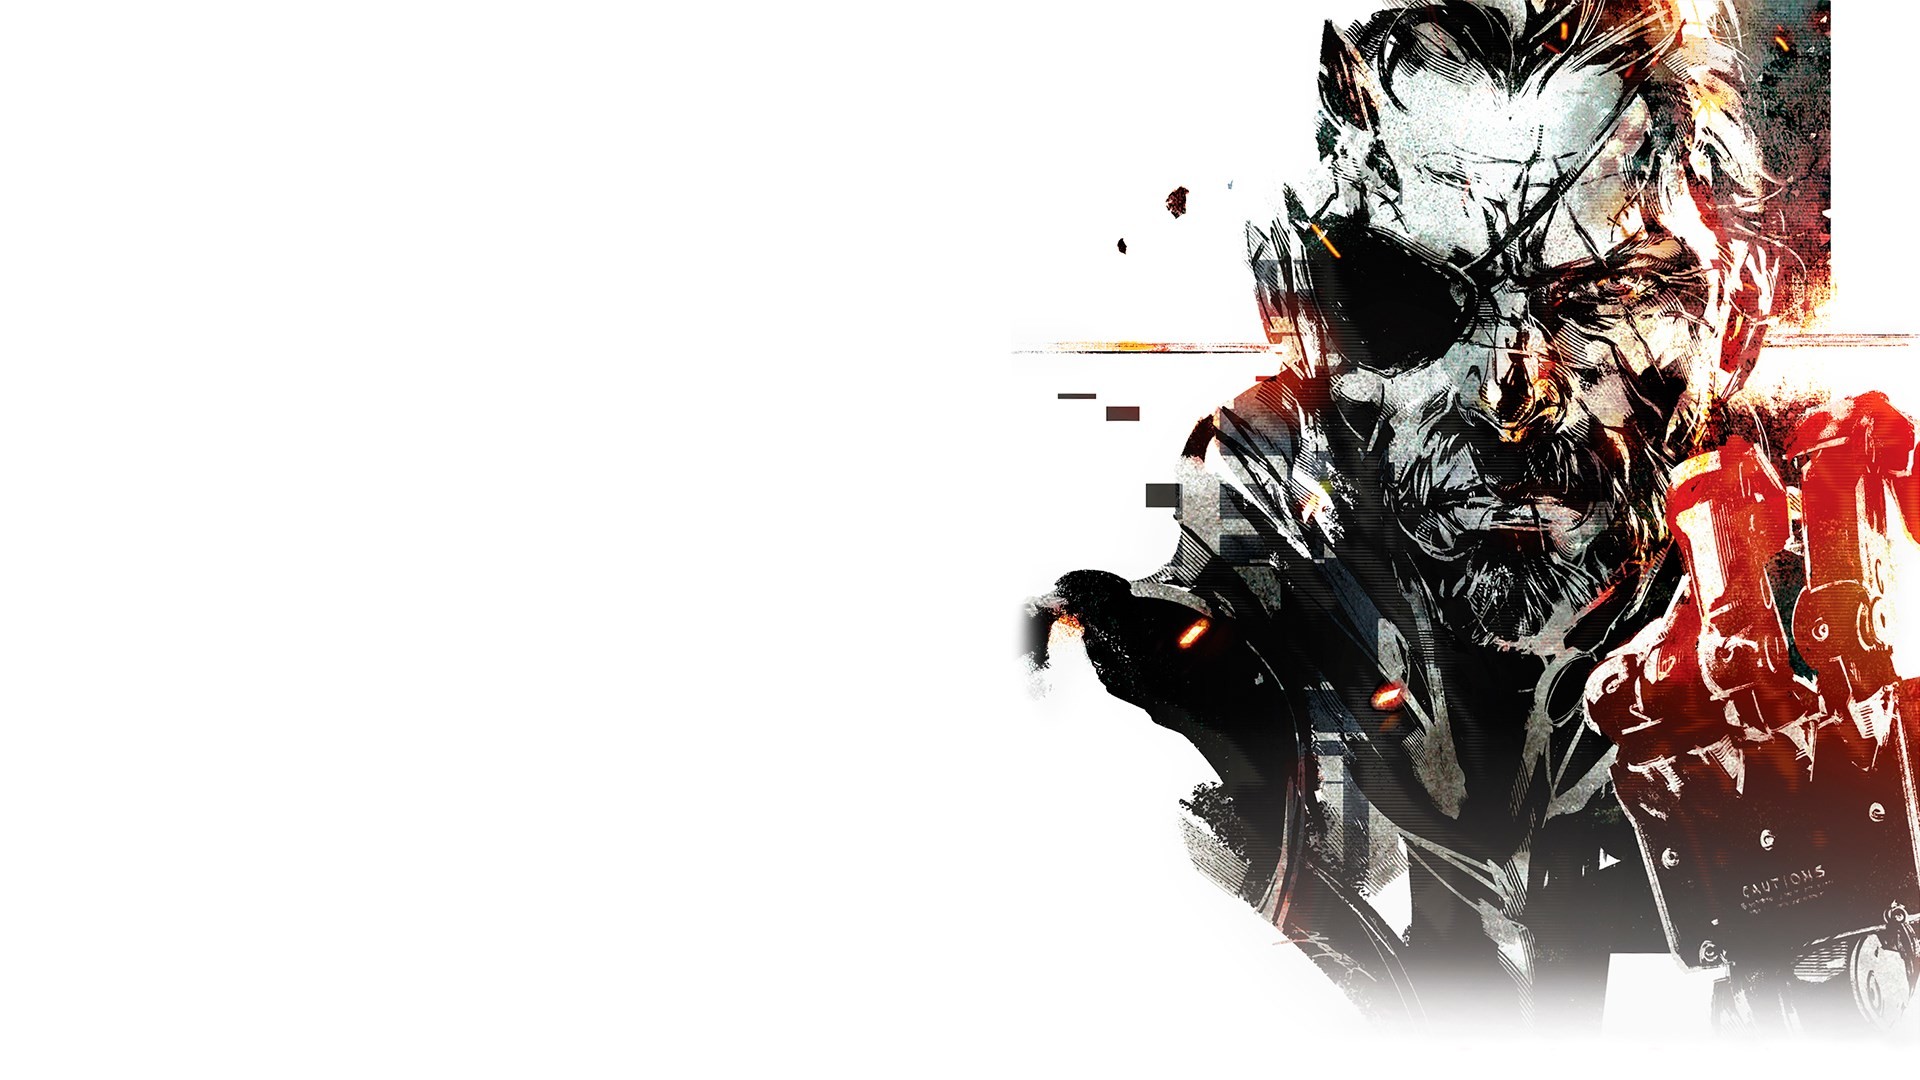 1920x1080 free download pictures of metal gear solid v the phantom pain